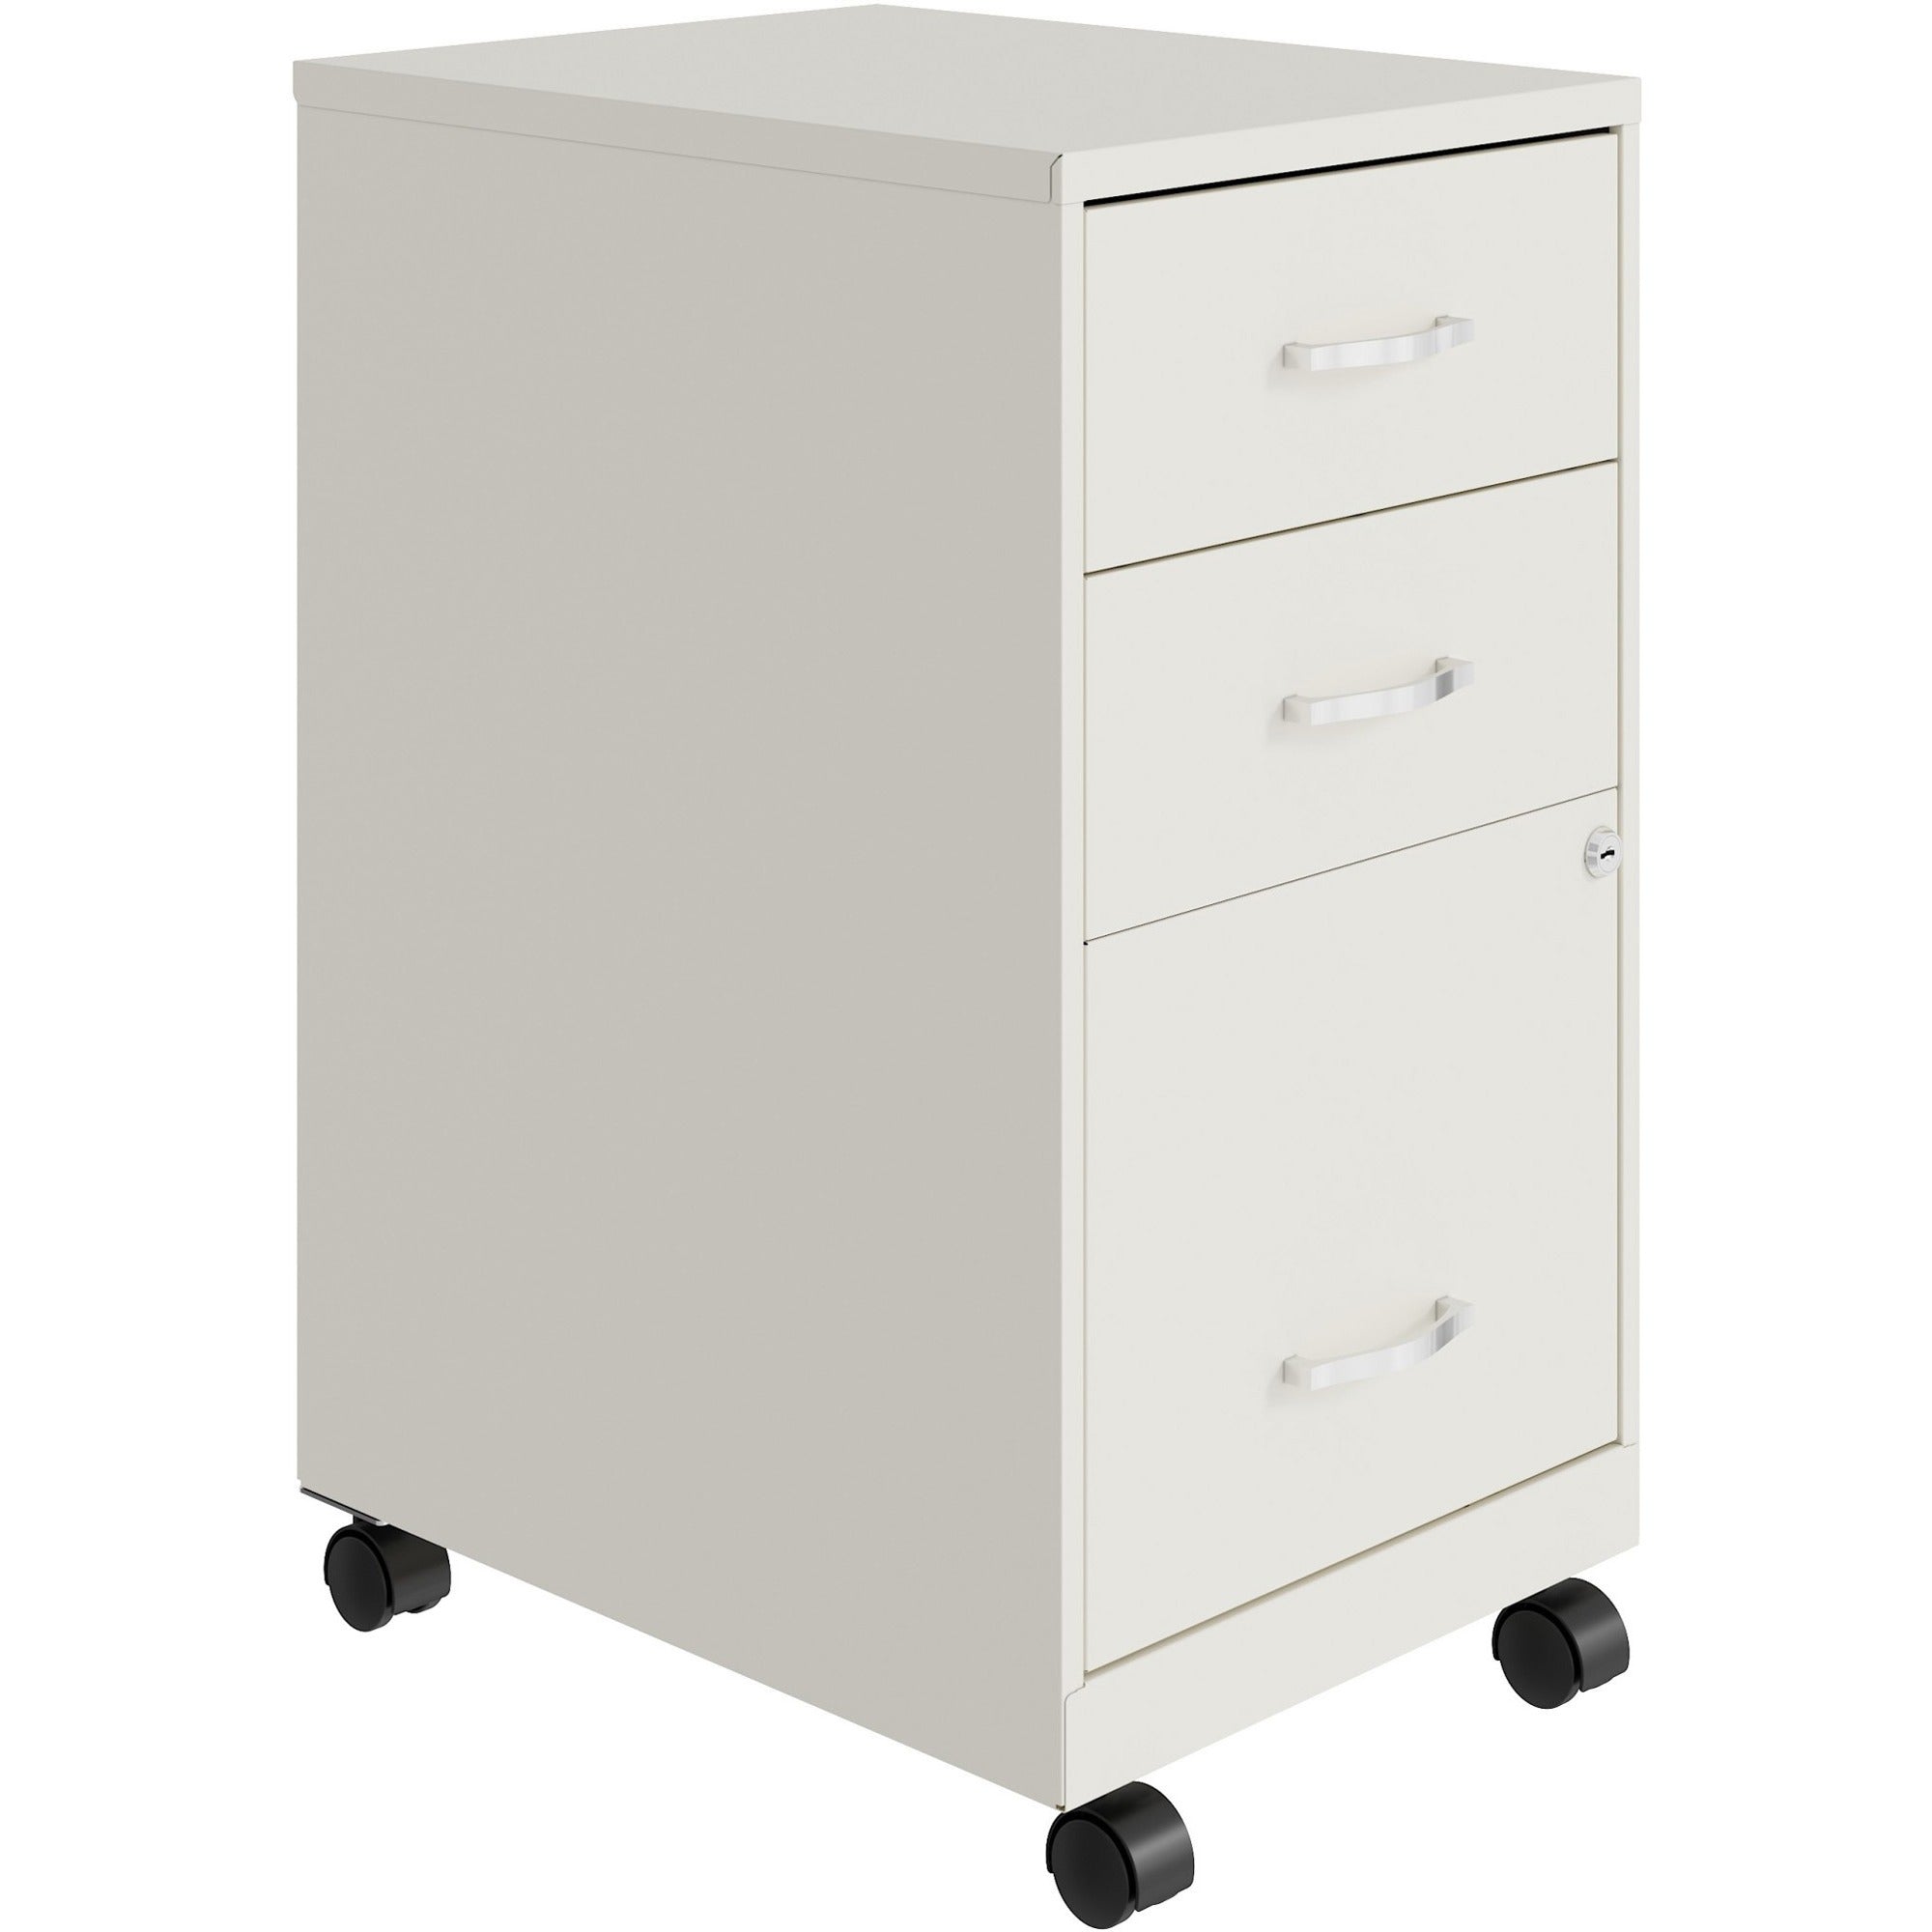 nusparc-3-drawer-organizer-metal-file-cabinet-142-x-18-x-267-3-x-drawers-for-file-box-letter-glide-suspension-3-4-drawer-extension-anti-tip-lockable-mobility-white-metal-recycled_nprvf318cmwe - 1